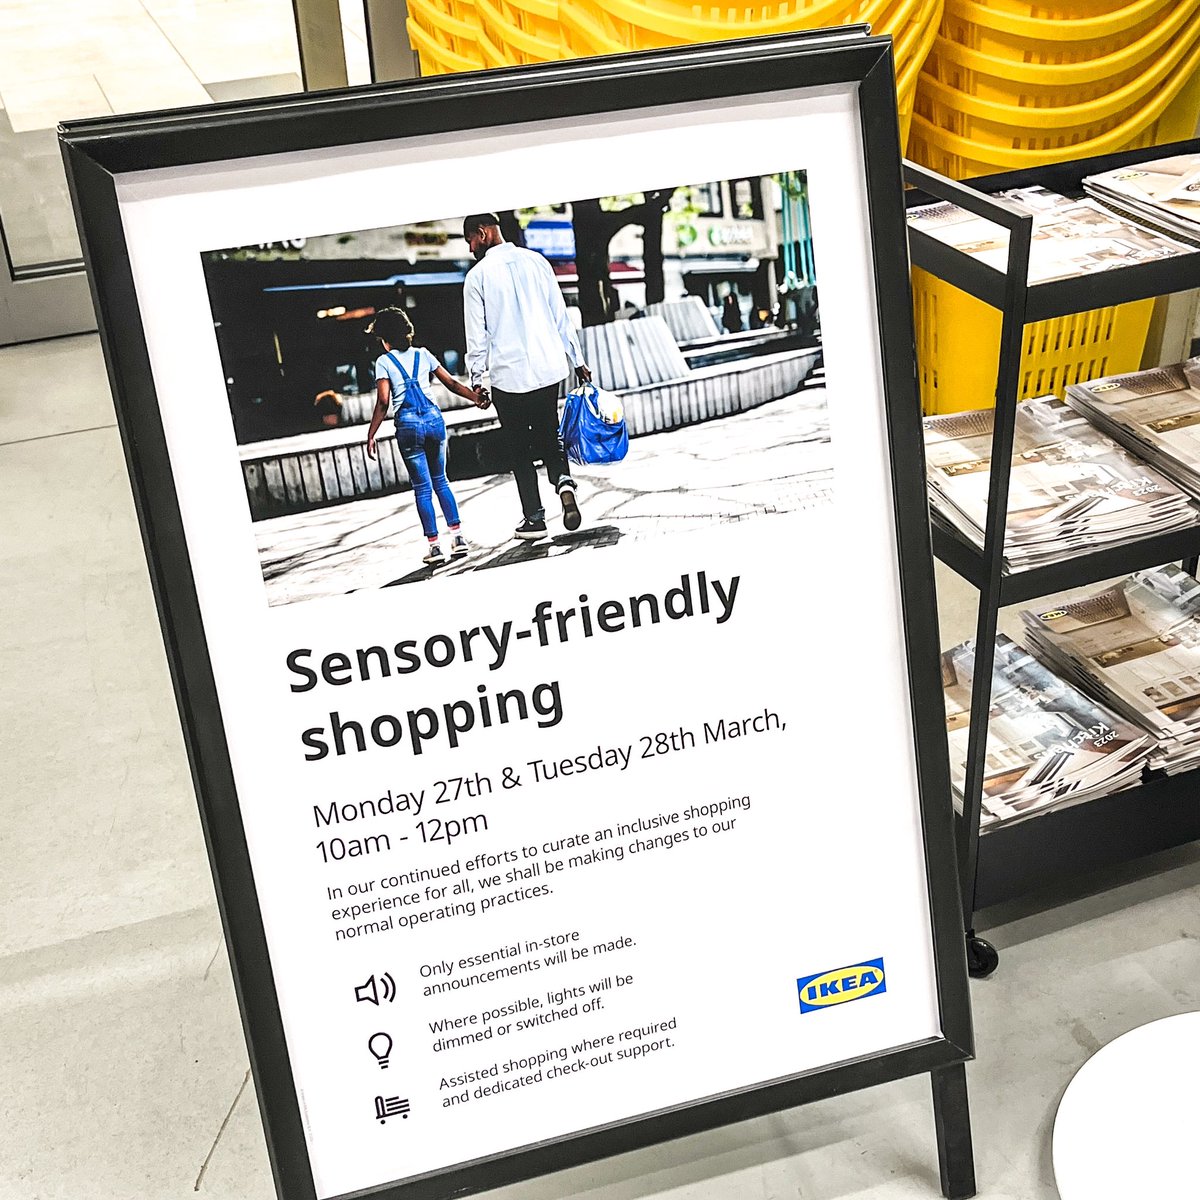 Saw this ‘Sensory-Friendly Shopping’ initiative from @ikeauk when I was out briefly the other day. Now this is great - it’s a step in the right direction and it means a lot to me to see these sorts of signs. However… 🧵 #autism #autistic #sensoryfriendly @IKEAUKSupport